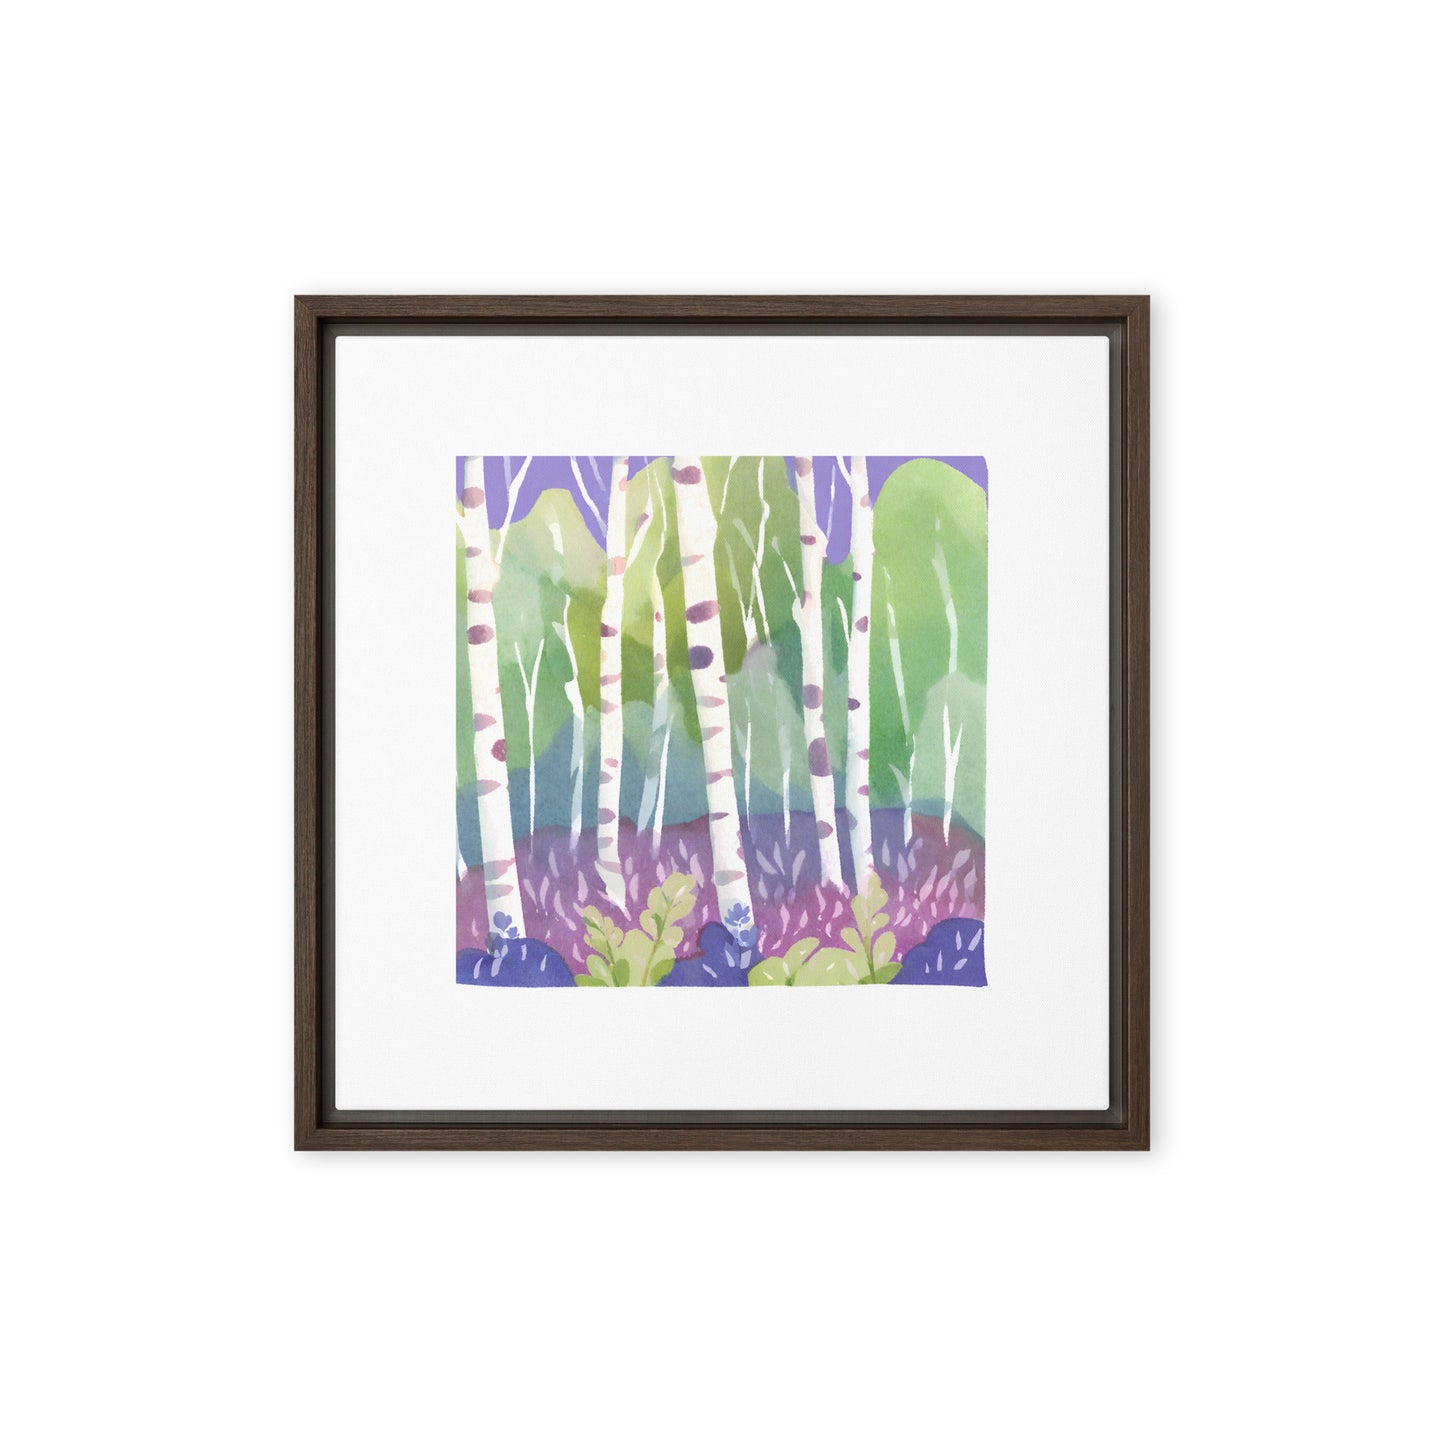 Birch and blueberries meeting - Framed canvas